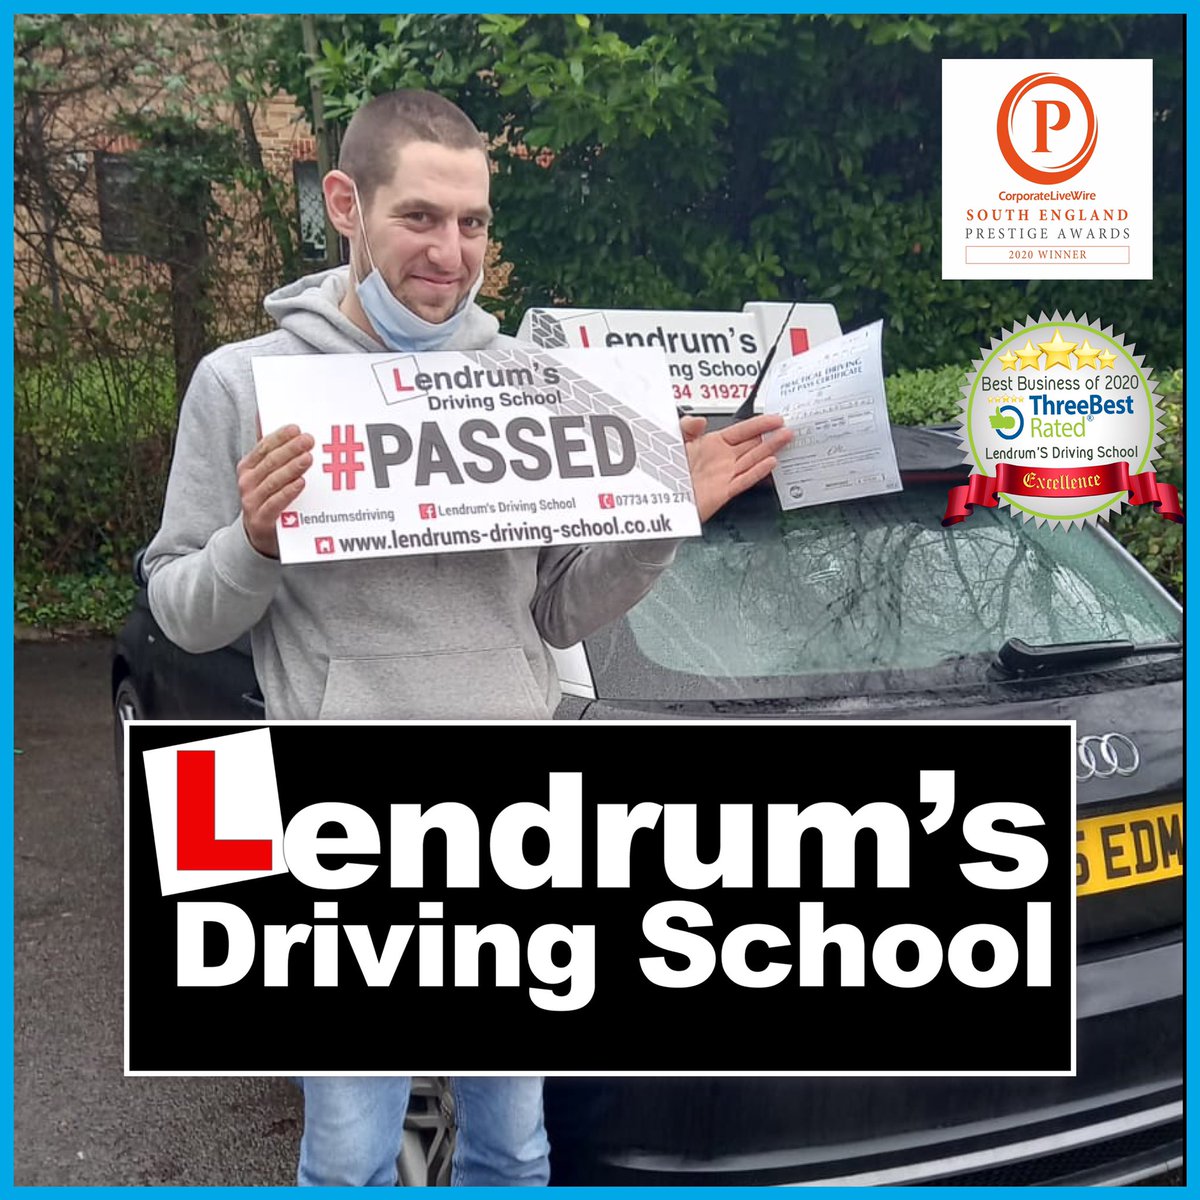 Congratulations to Craig who #passed his #drivingtest 1st time 🏆🥇🏆🥇🏆🥇 in #Southampton with #drivinginstructor Michelle